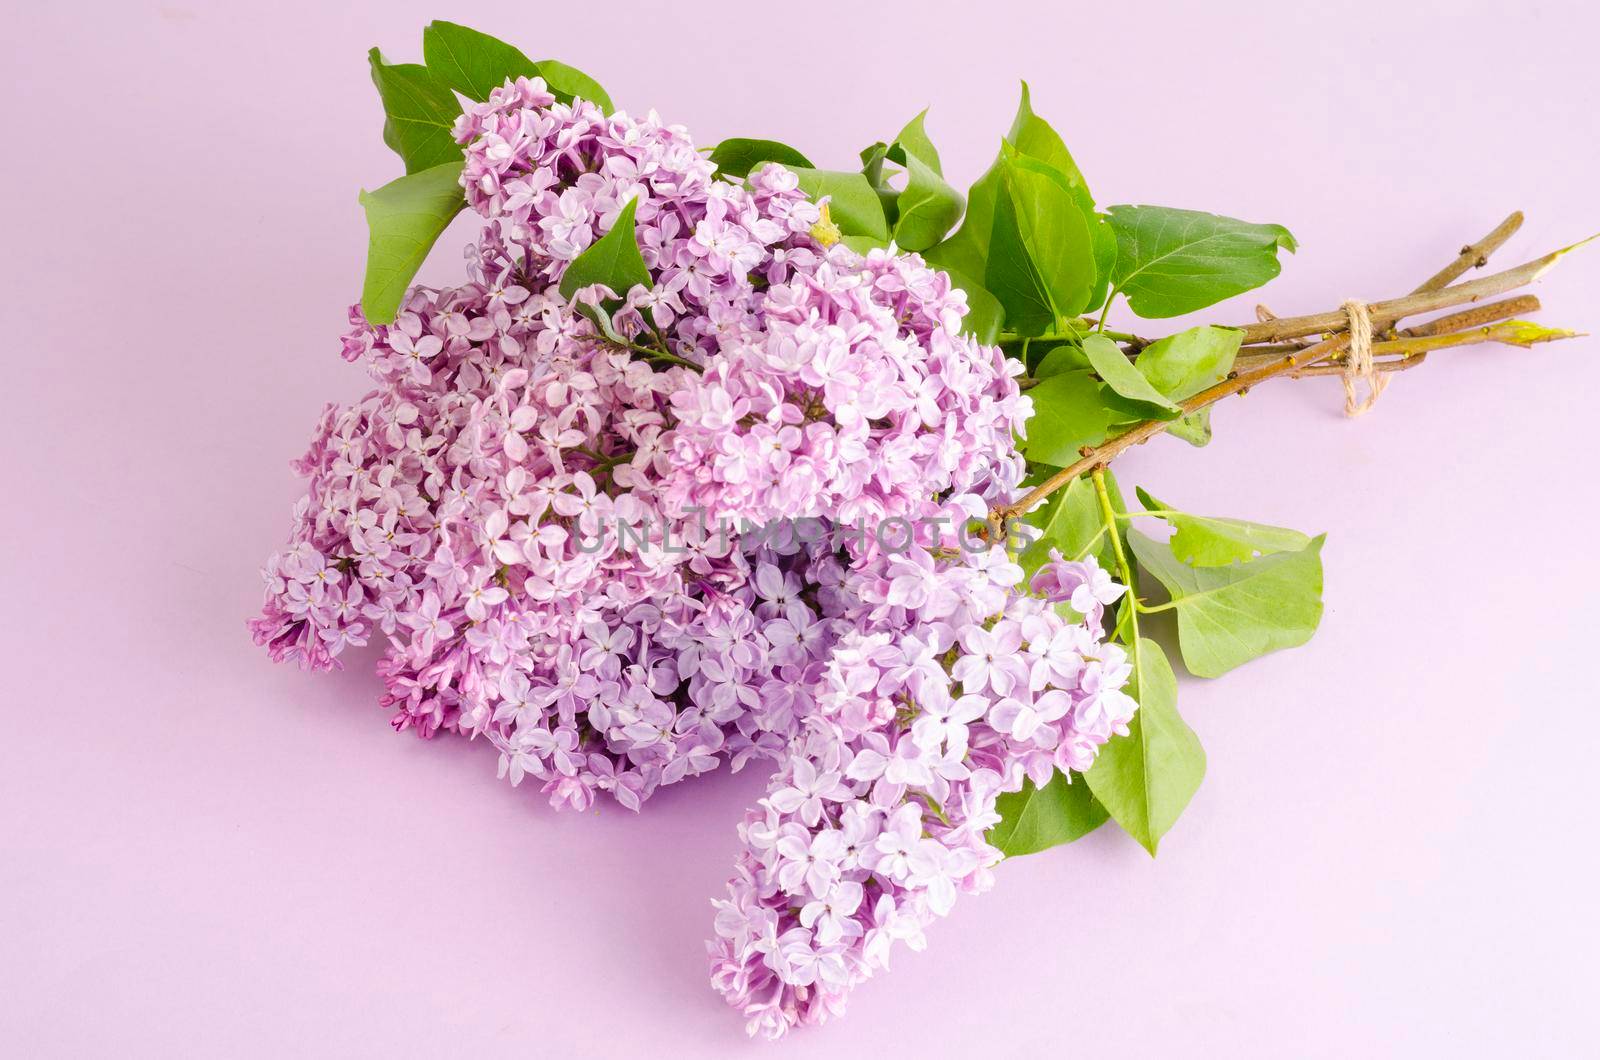 Blooming lilac branches on bright background. Studio Photo.